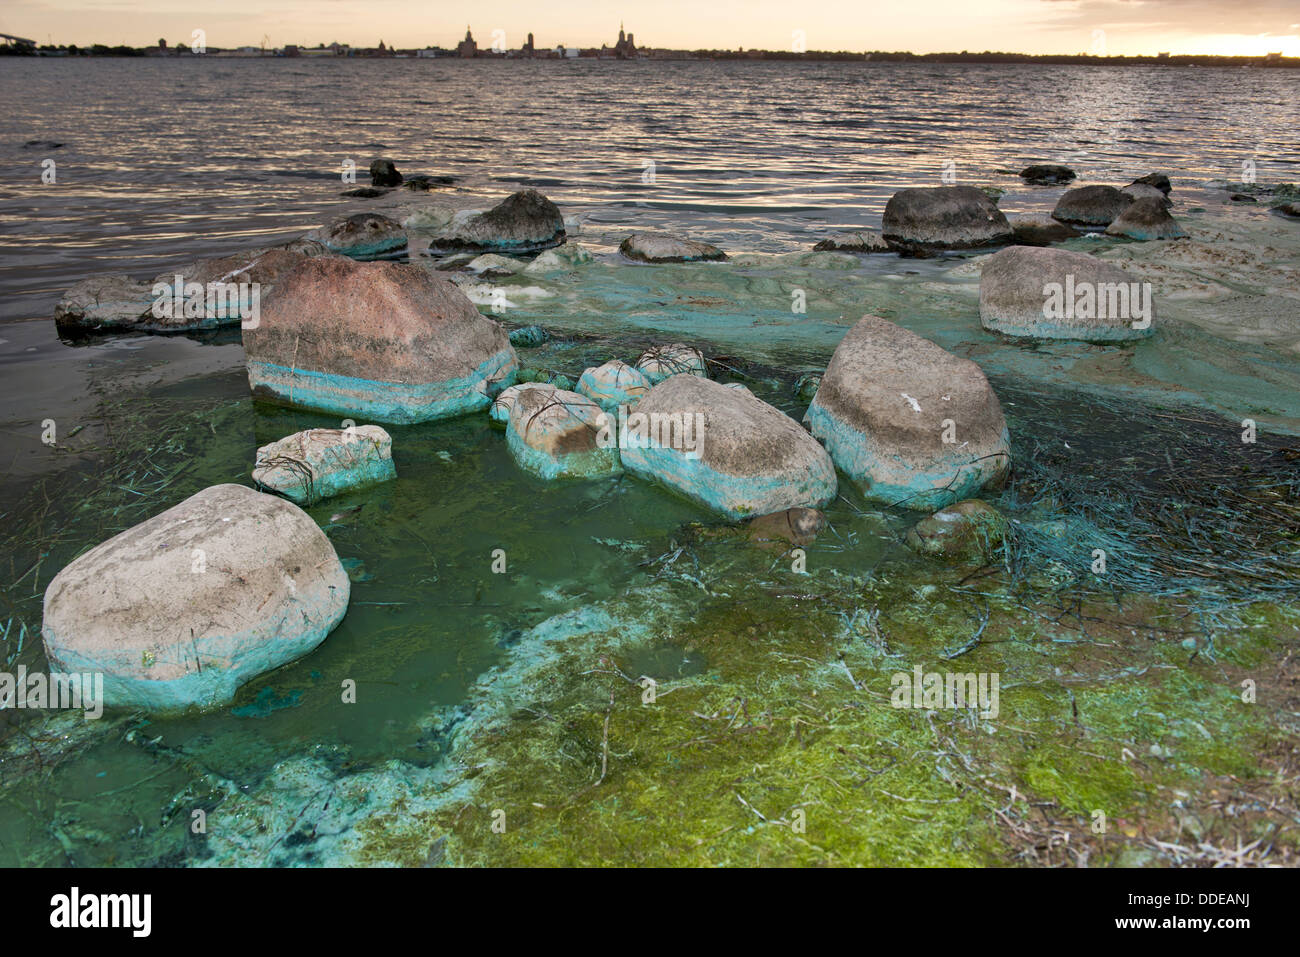 A cyanobacteria bloom is seen at the Strelasund off of Altefaehr, Germany, 31 August 2013. Blue-green algae blooms occur mainly in the summer months at high water temperatures. Cyanophyta can irritate skin and mucous membranes. Nausea, diarrhea, and vomiting may occur if water contaminated with blue-green algae is swallowed. Photo: STEFAN SAUER Stock Photo